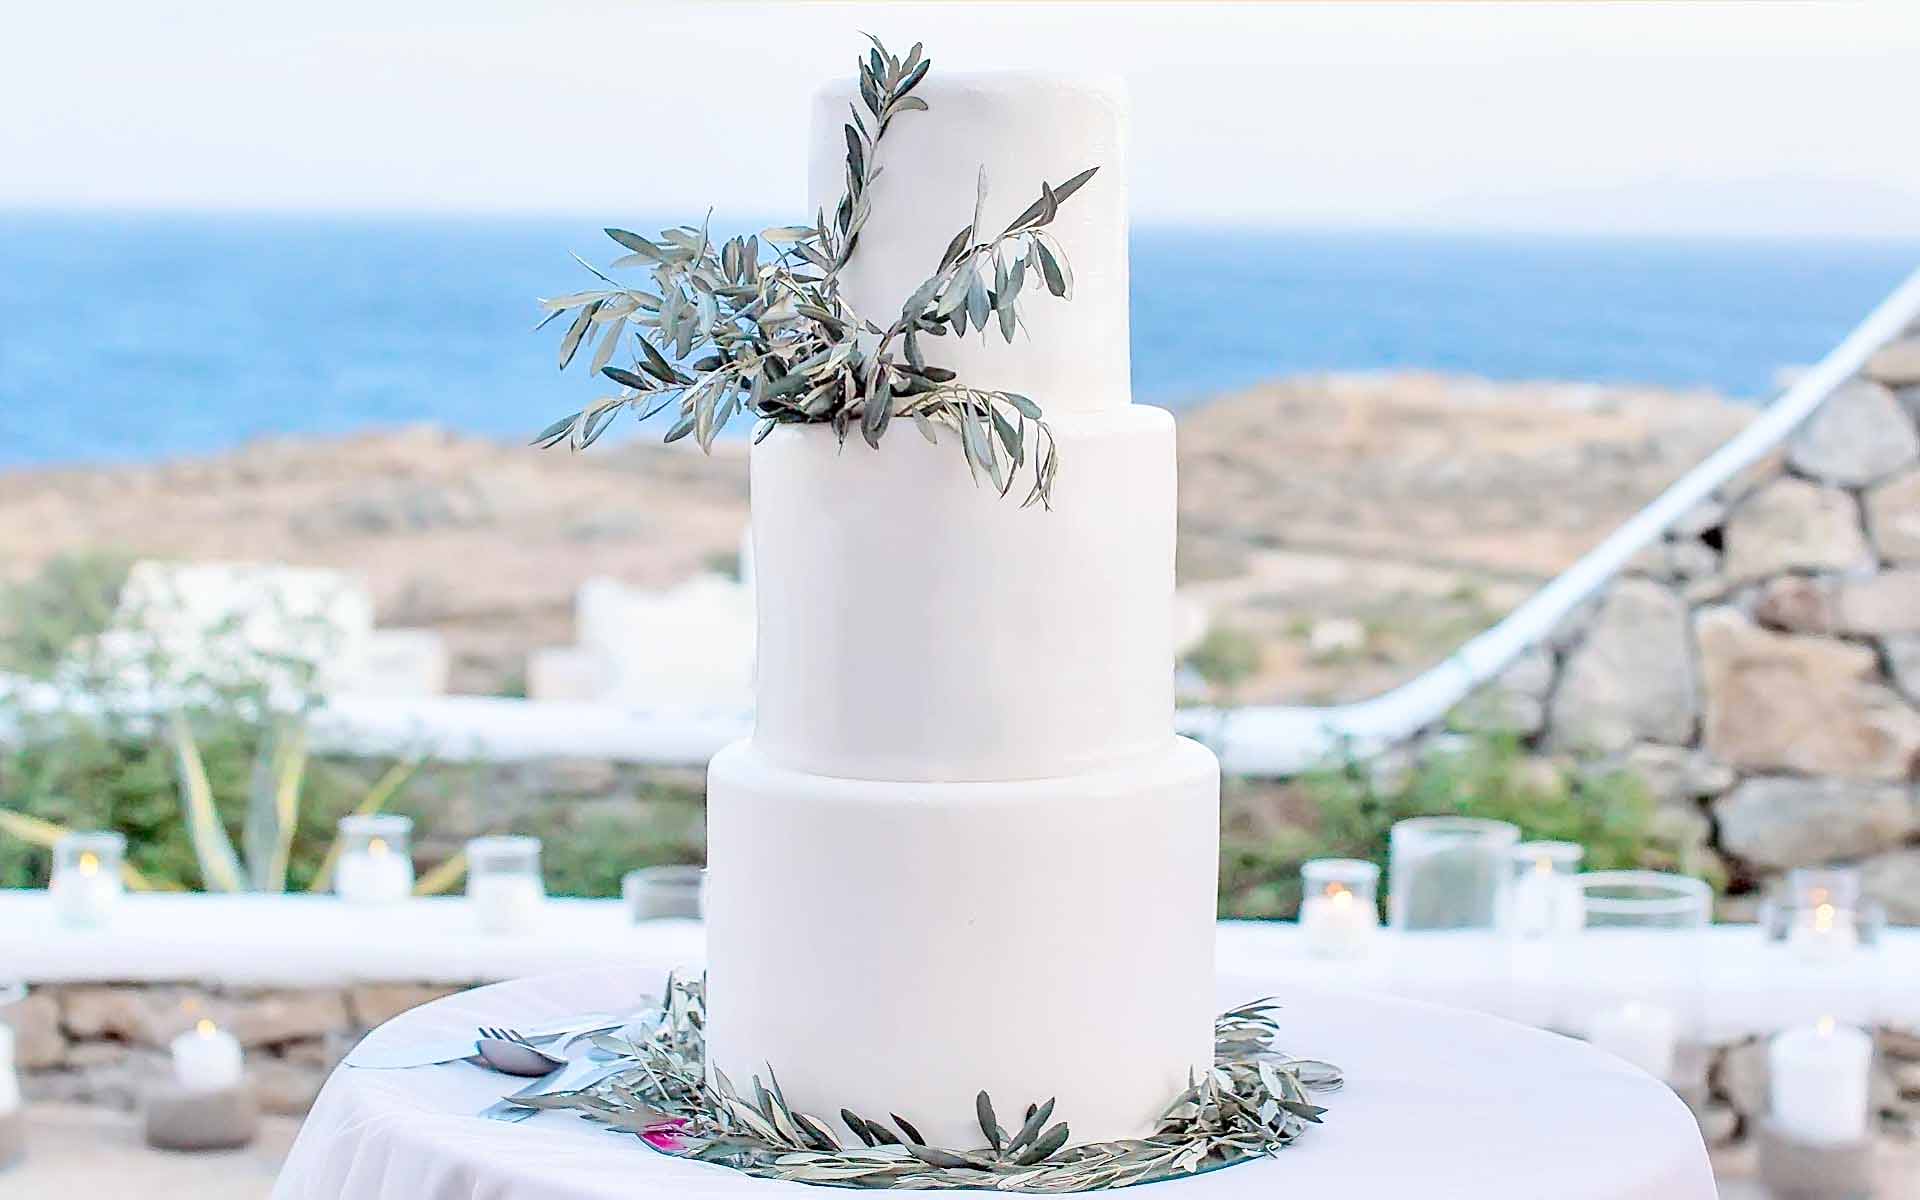 Sweet Connoisseur - Little Greek style wedding cake. Coconut lime and  coconut mango layers. A surprise cake😁 ordered by overseas relatives  unable to attend😥 | Facebook